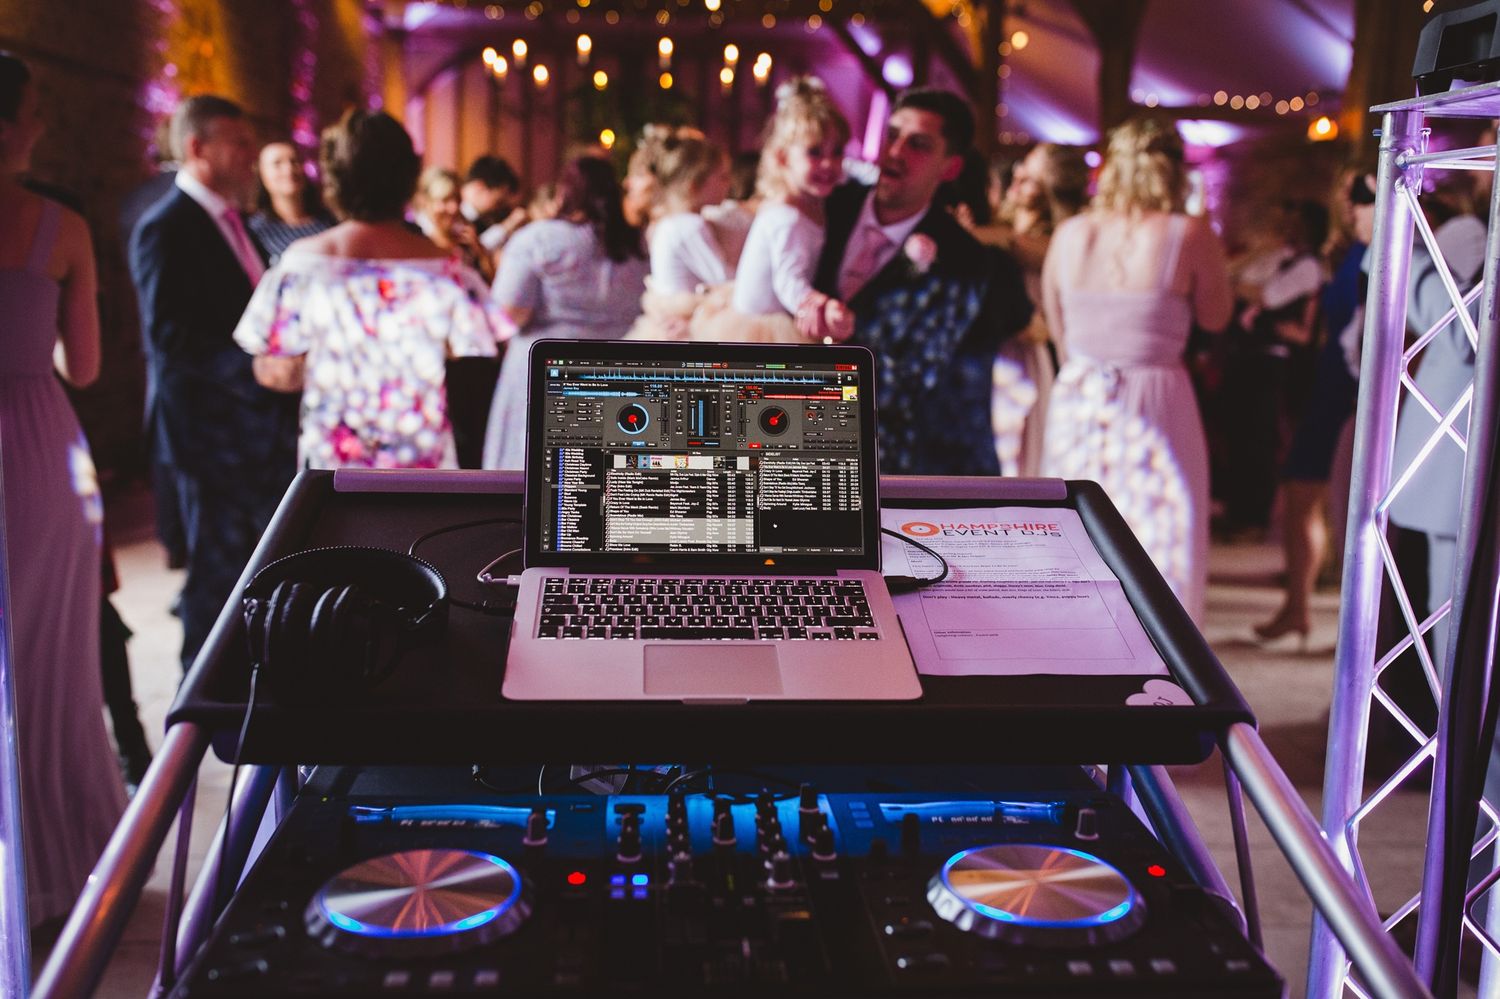 How To Find A Wedding DJ